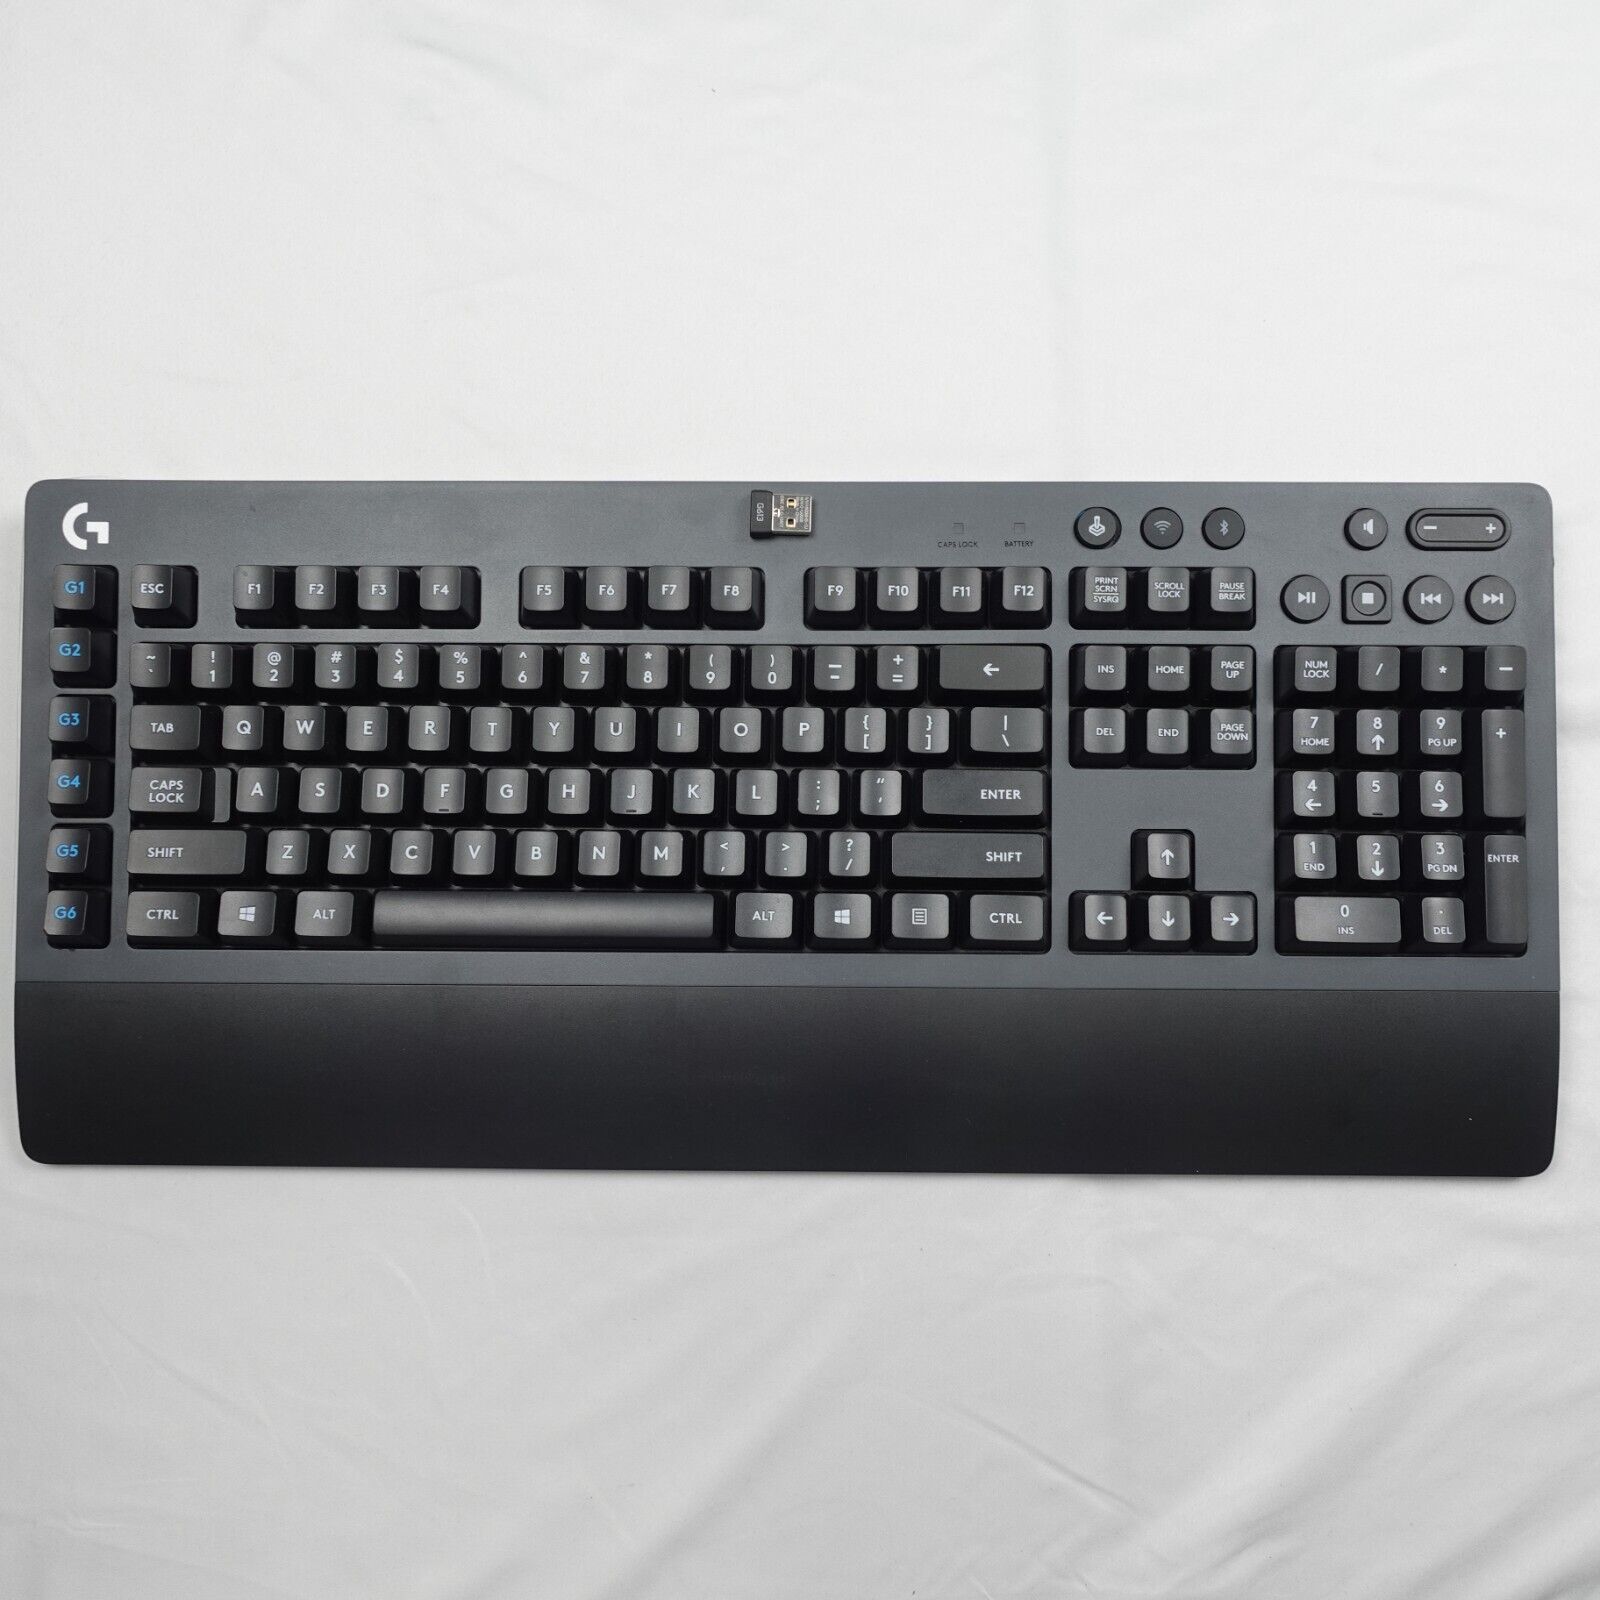 Logitech G613 Wireless Keyboard Gaming with dongle Tested and Working